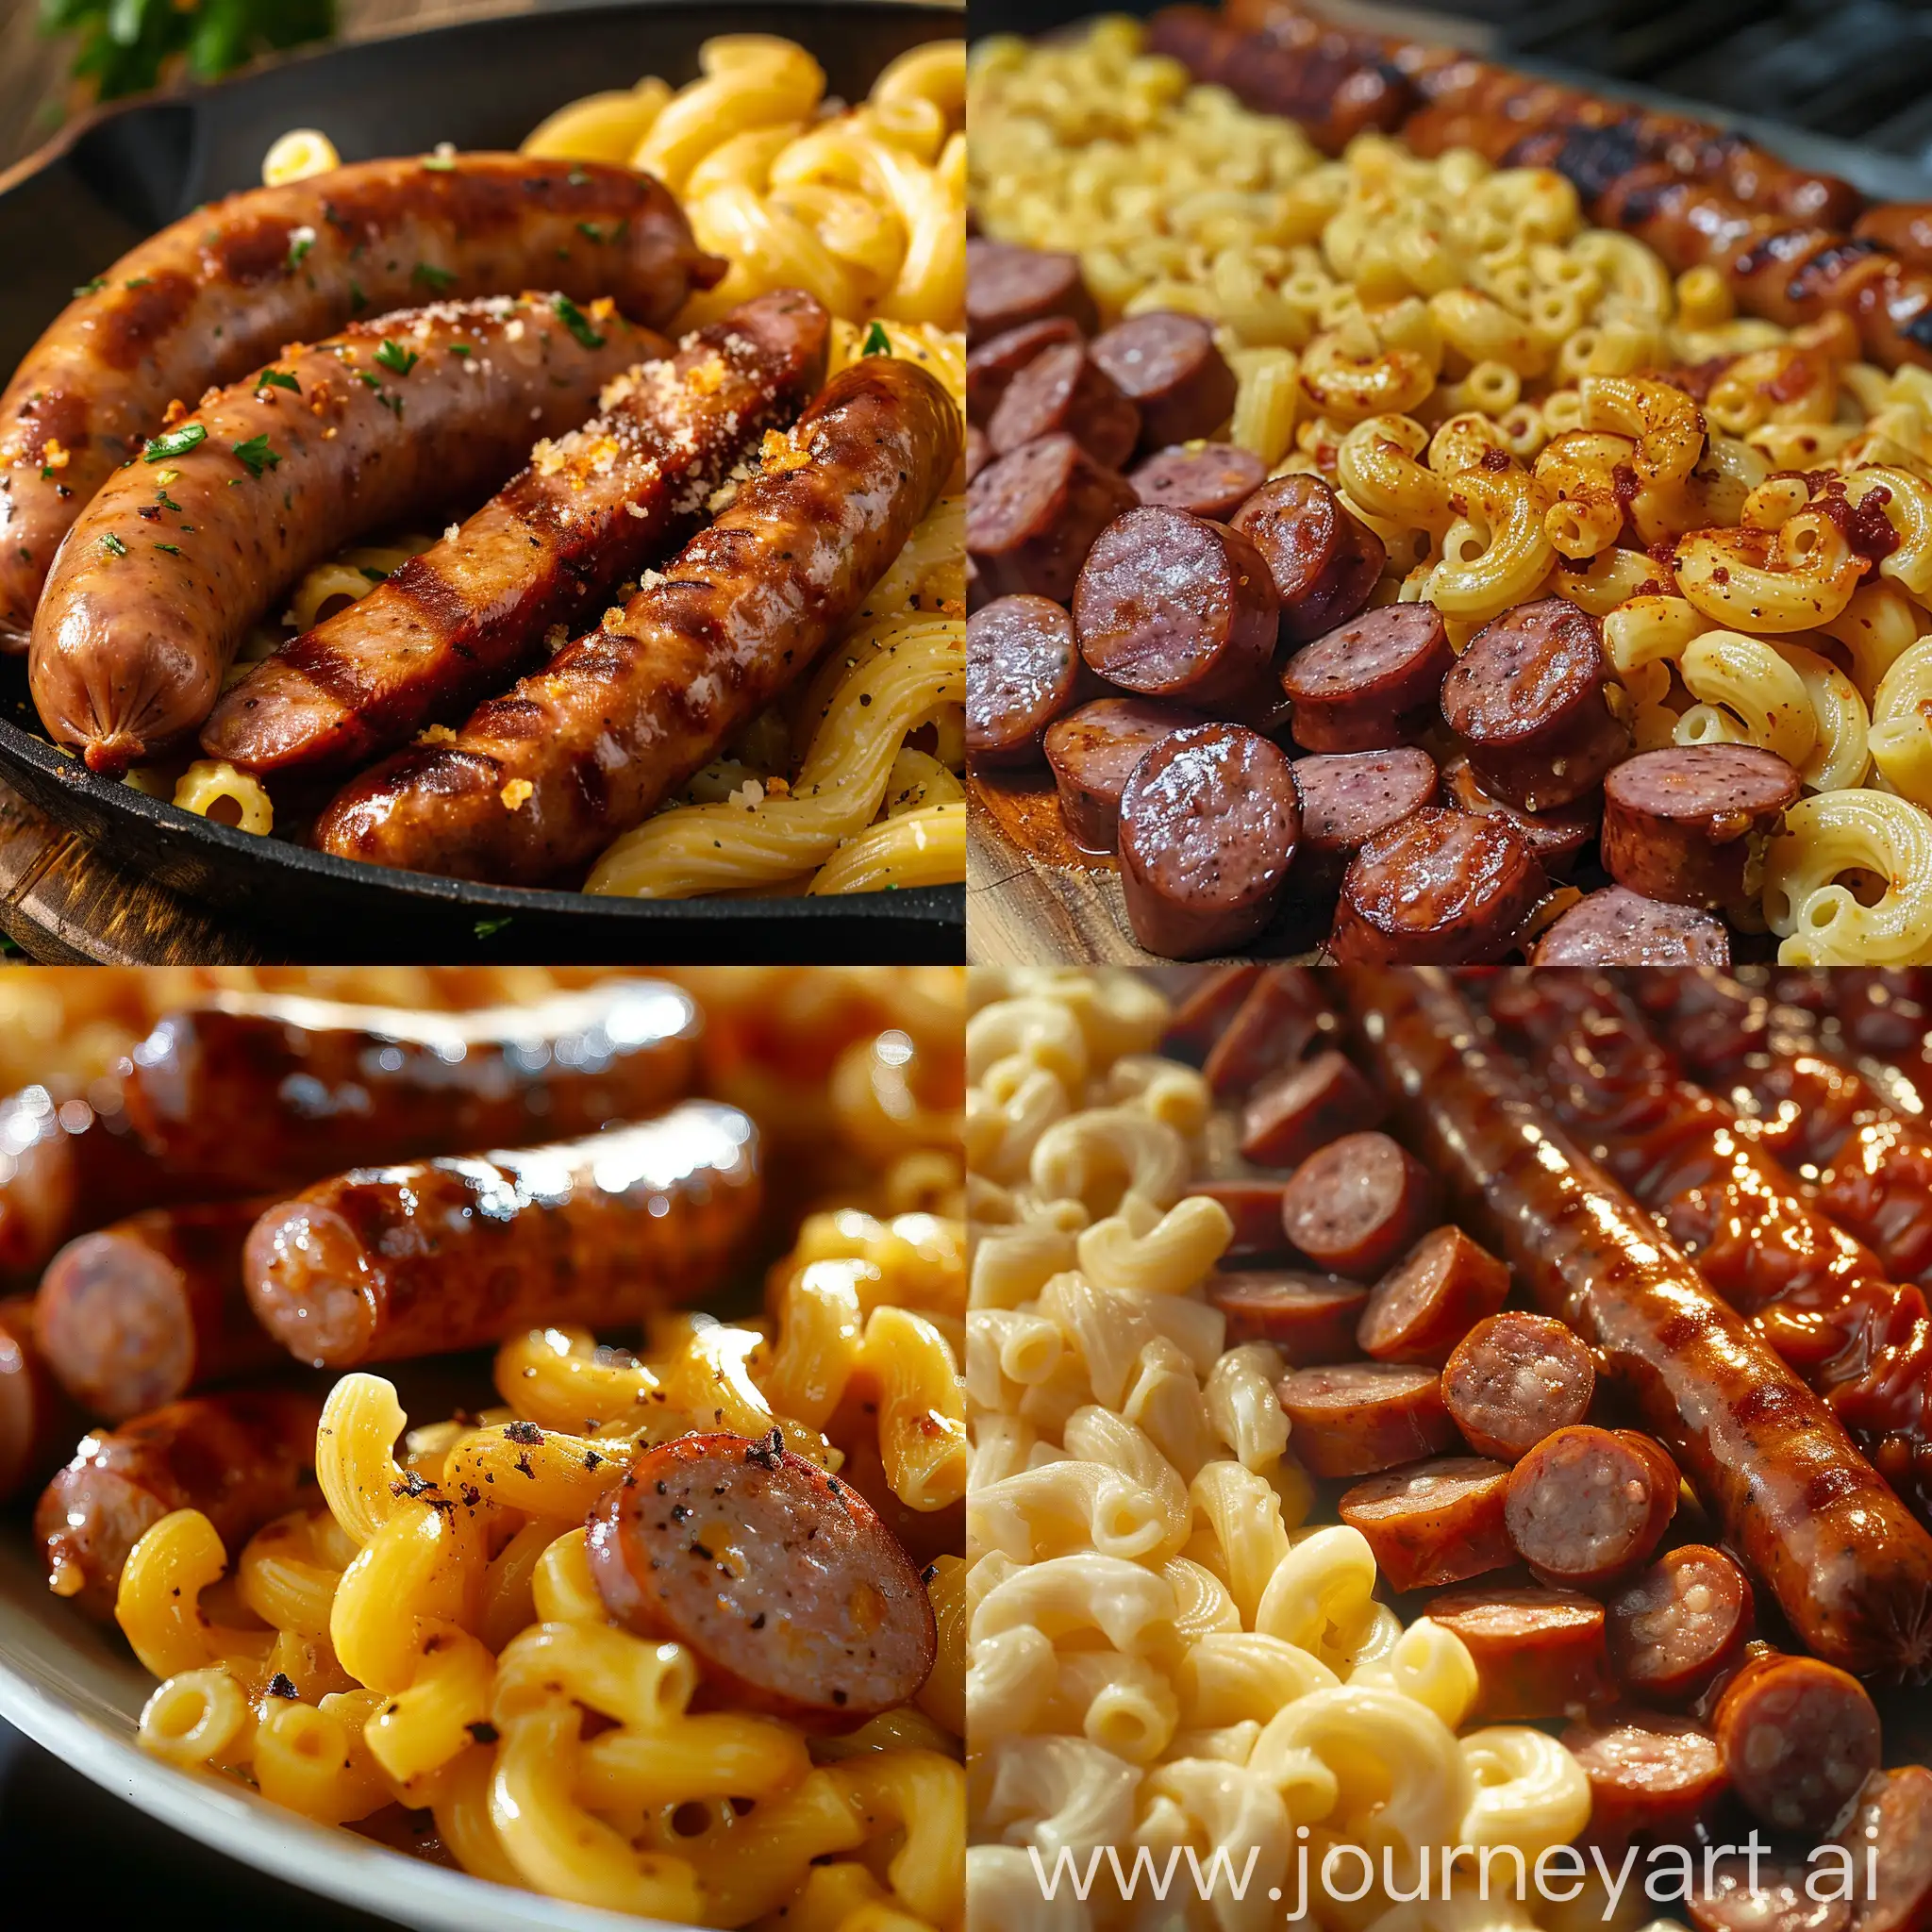 Epic-Battle-Sausages-vs-Macaroni-in-a-War-of-Flavors